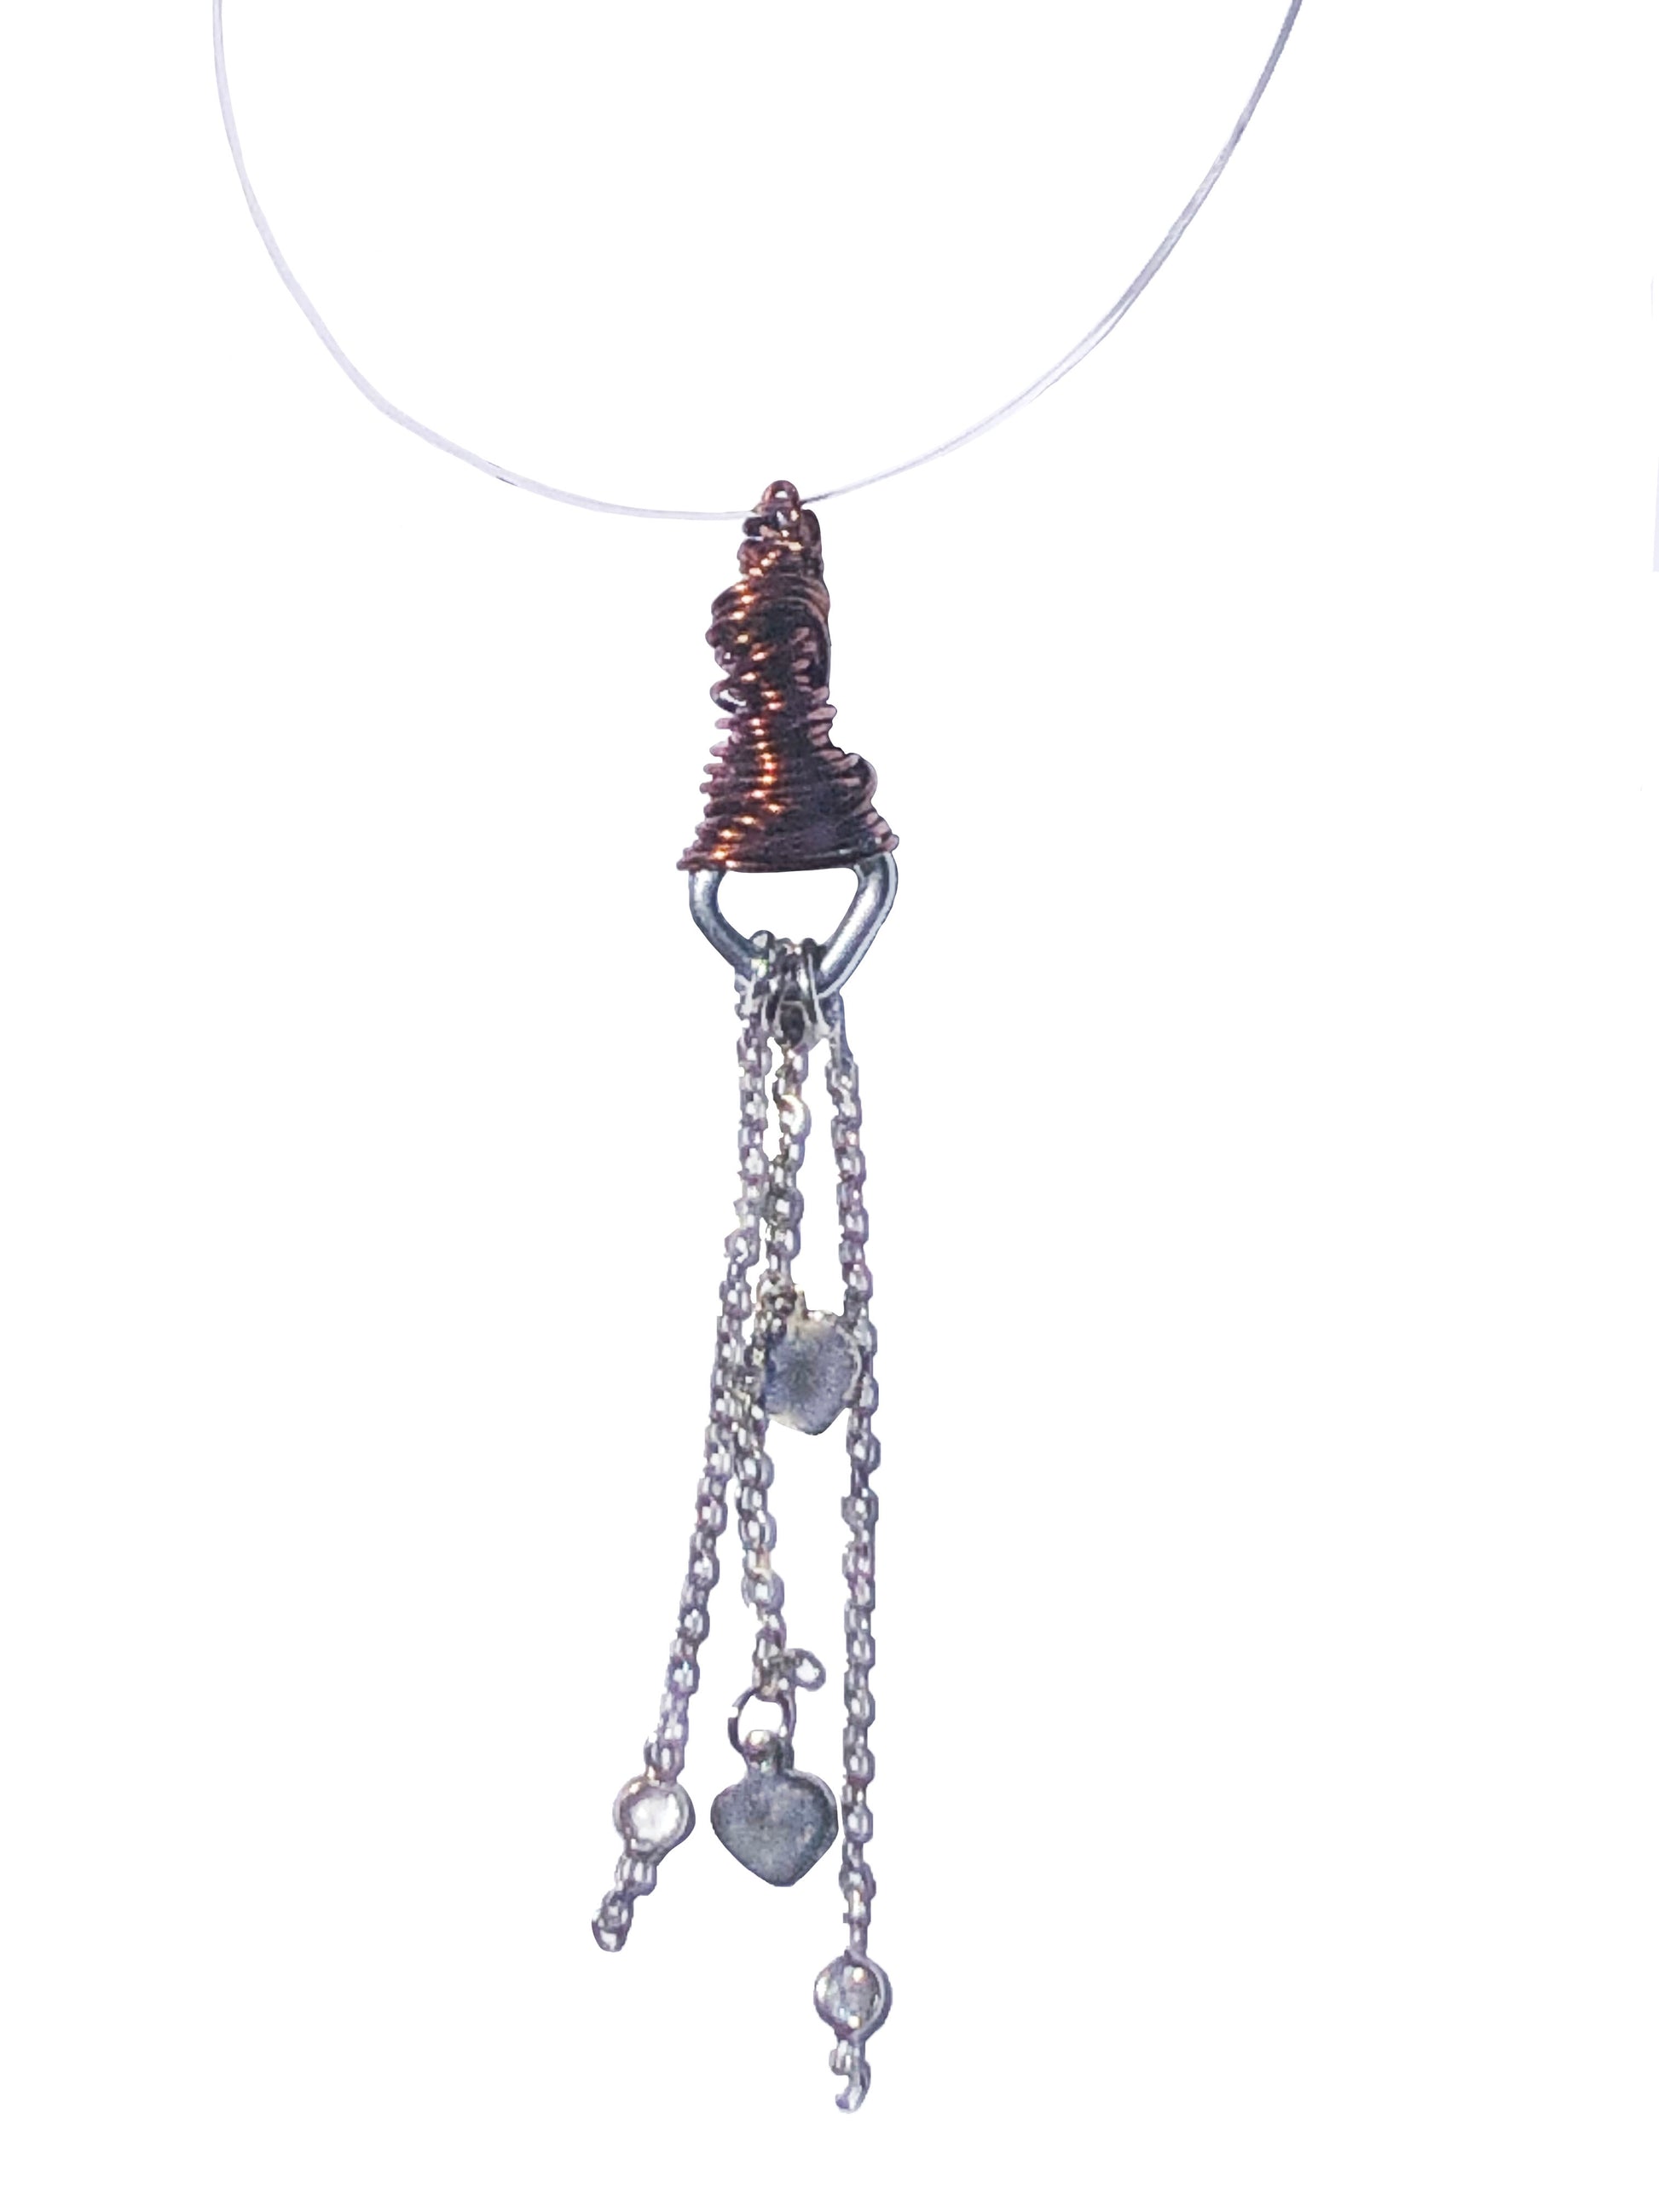 handcrafted bronze wire wrapped pendant with silver chains and heart charms.